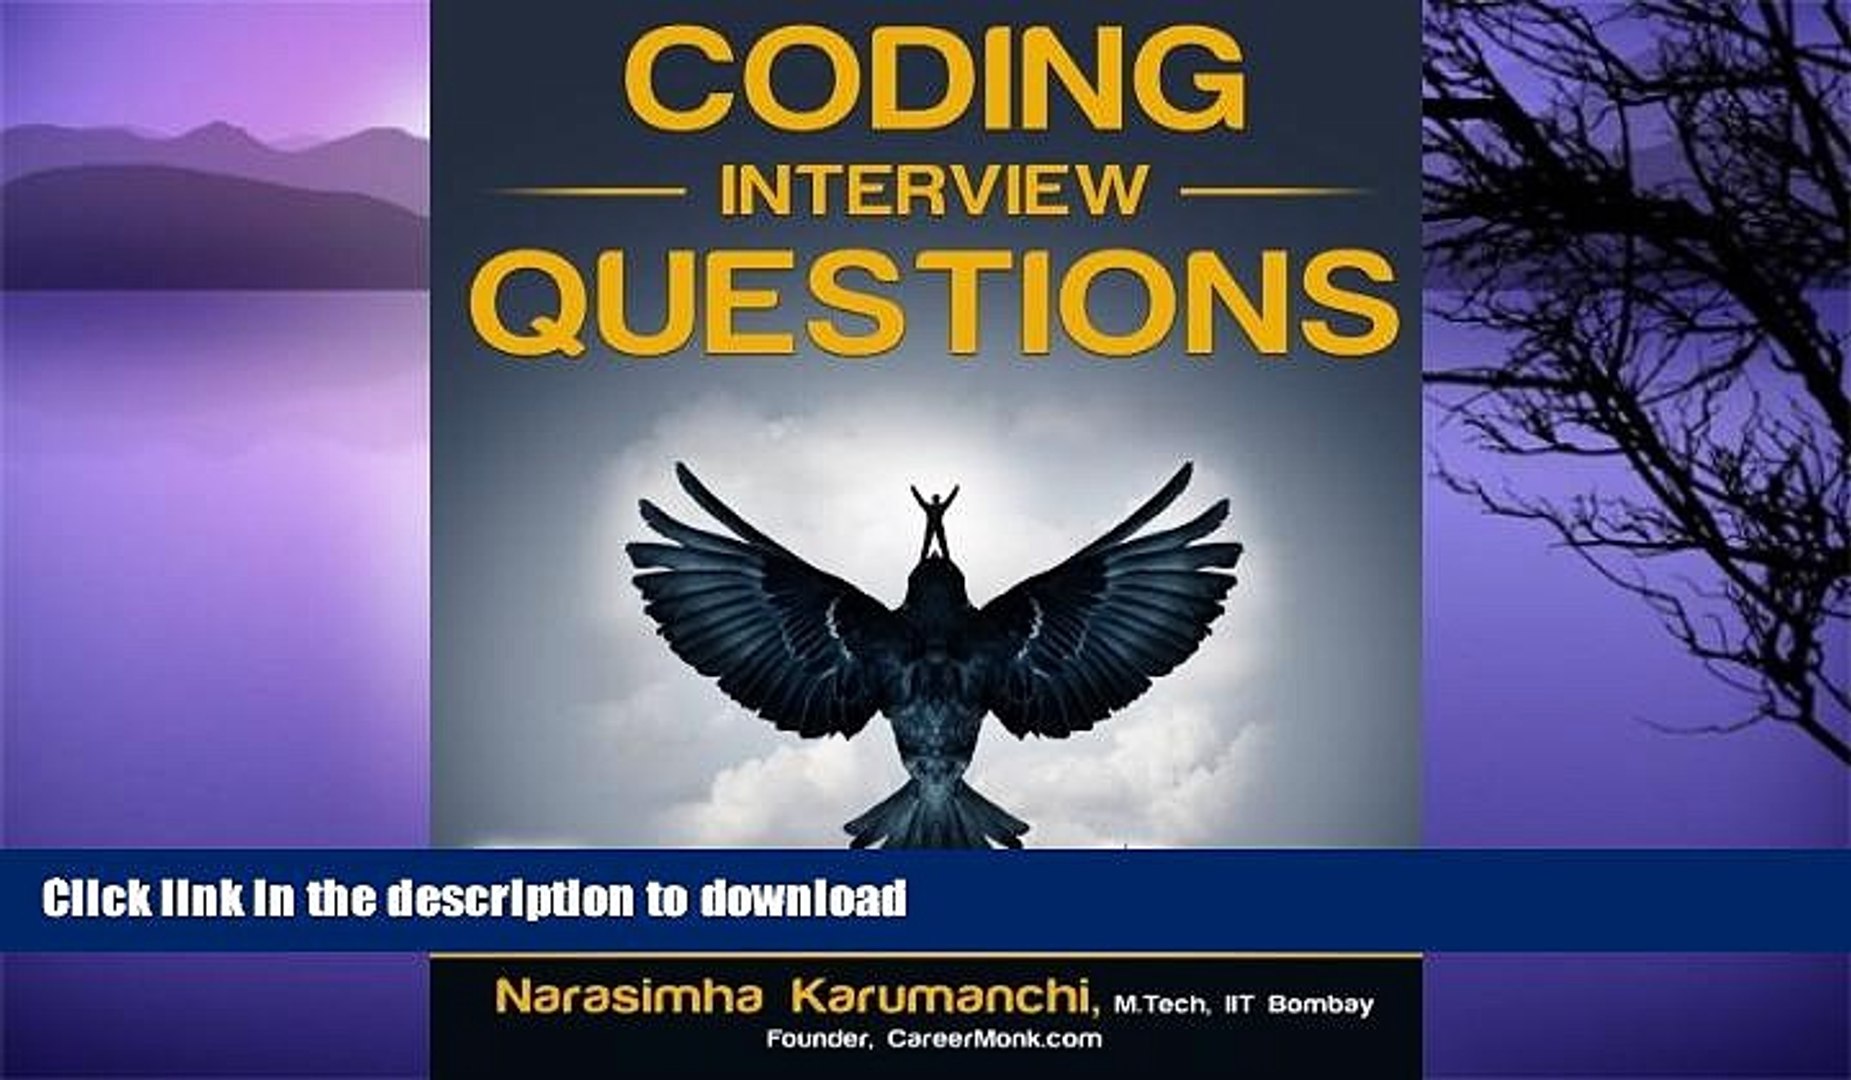 READ  Coding Interview Questions, 3rd Edition  BOOK ONLINE